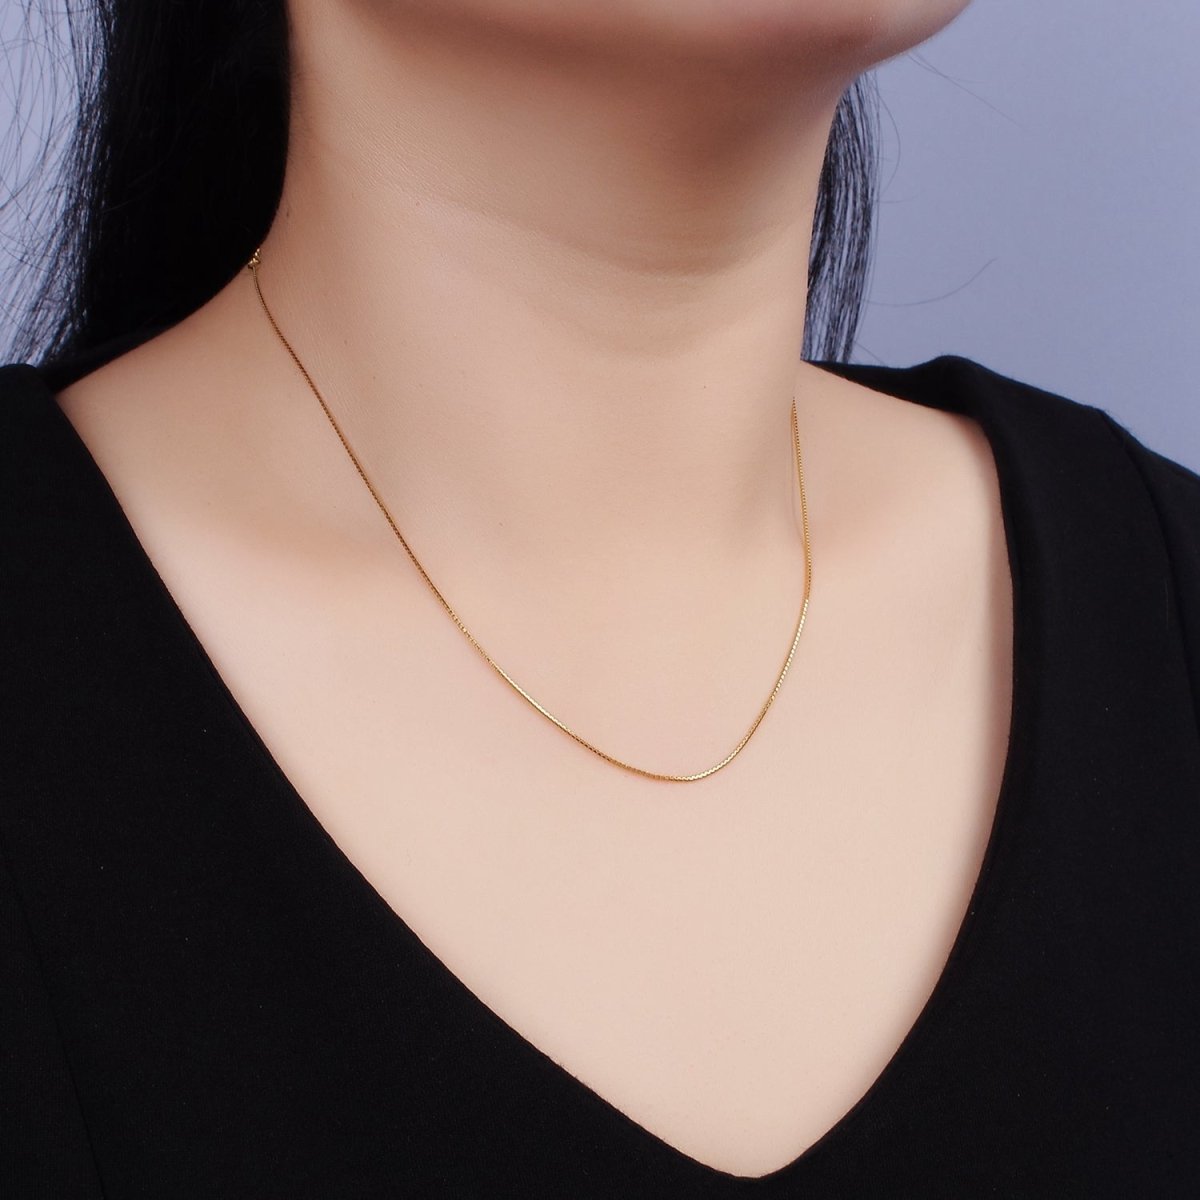 Dainty 24K Gold Vermeil Box Chain Necklace 925 Sterling Silver Necklace Chain w/ Heavy 24K Gold Plated 15.35 inch + 2 inch extender | WA-1982 Clearance Pricing - DLUXCA